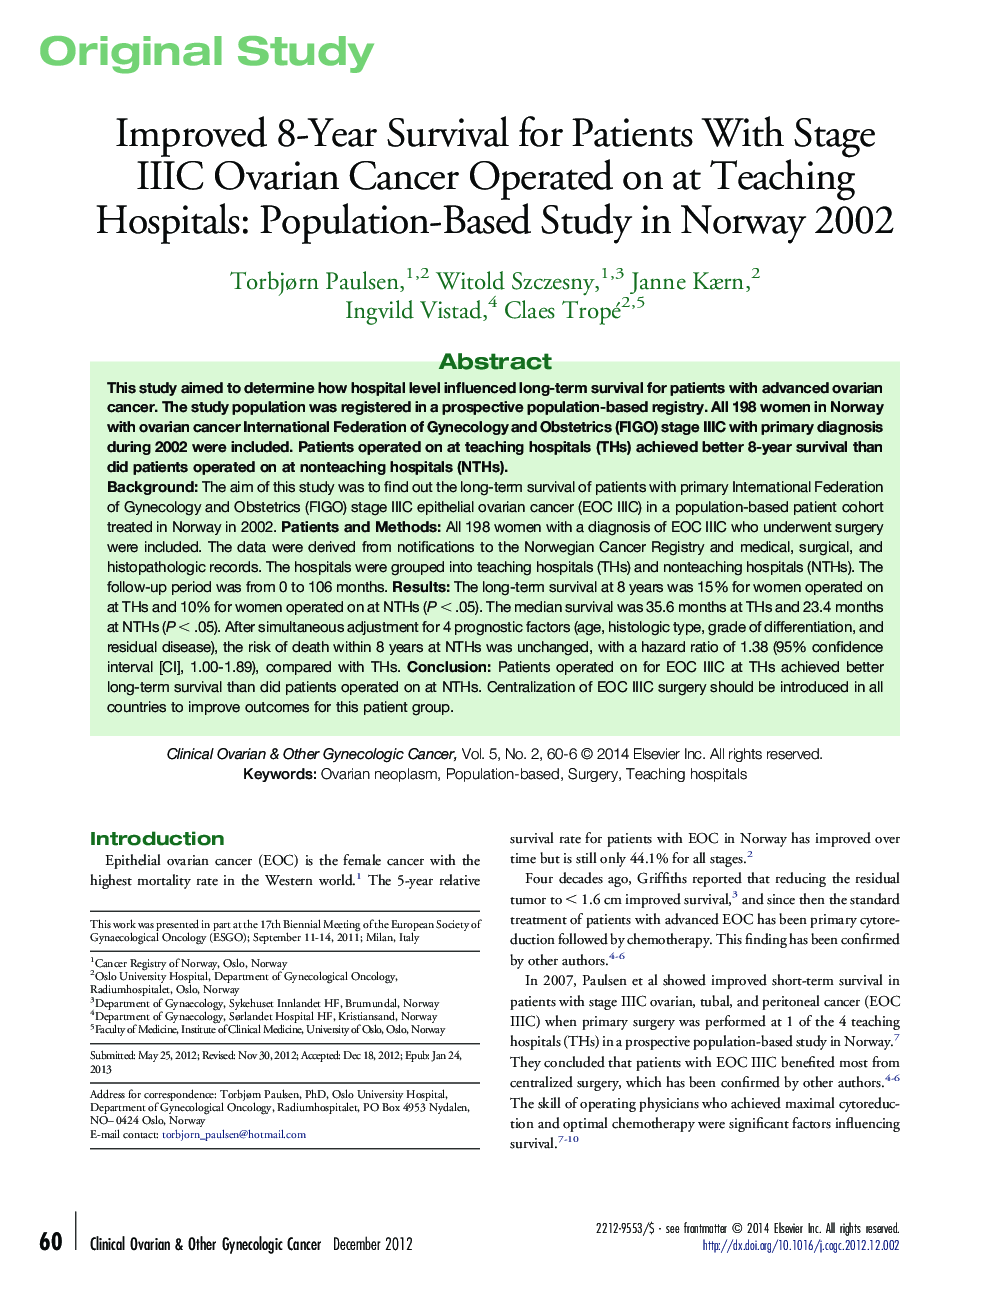 Improved 8-Year Survival for Patients With Stage IIIC Ovarian Cancer Operated on at Teaching Hospitals: Population-Based Study in Norway 2002